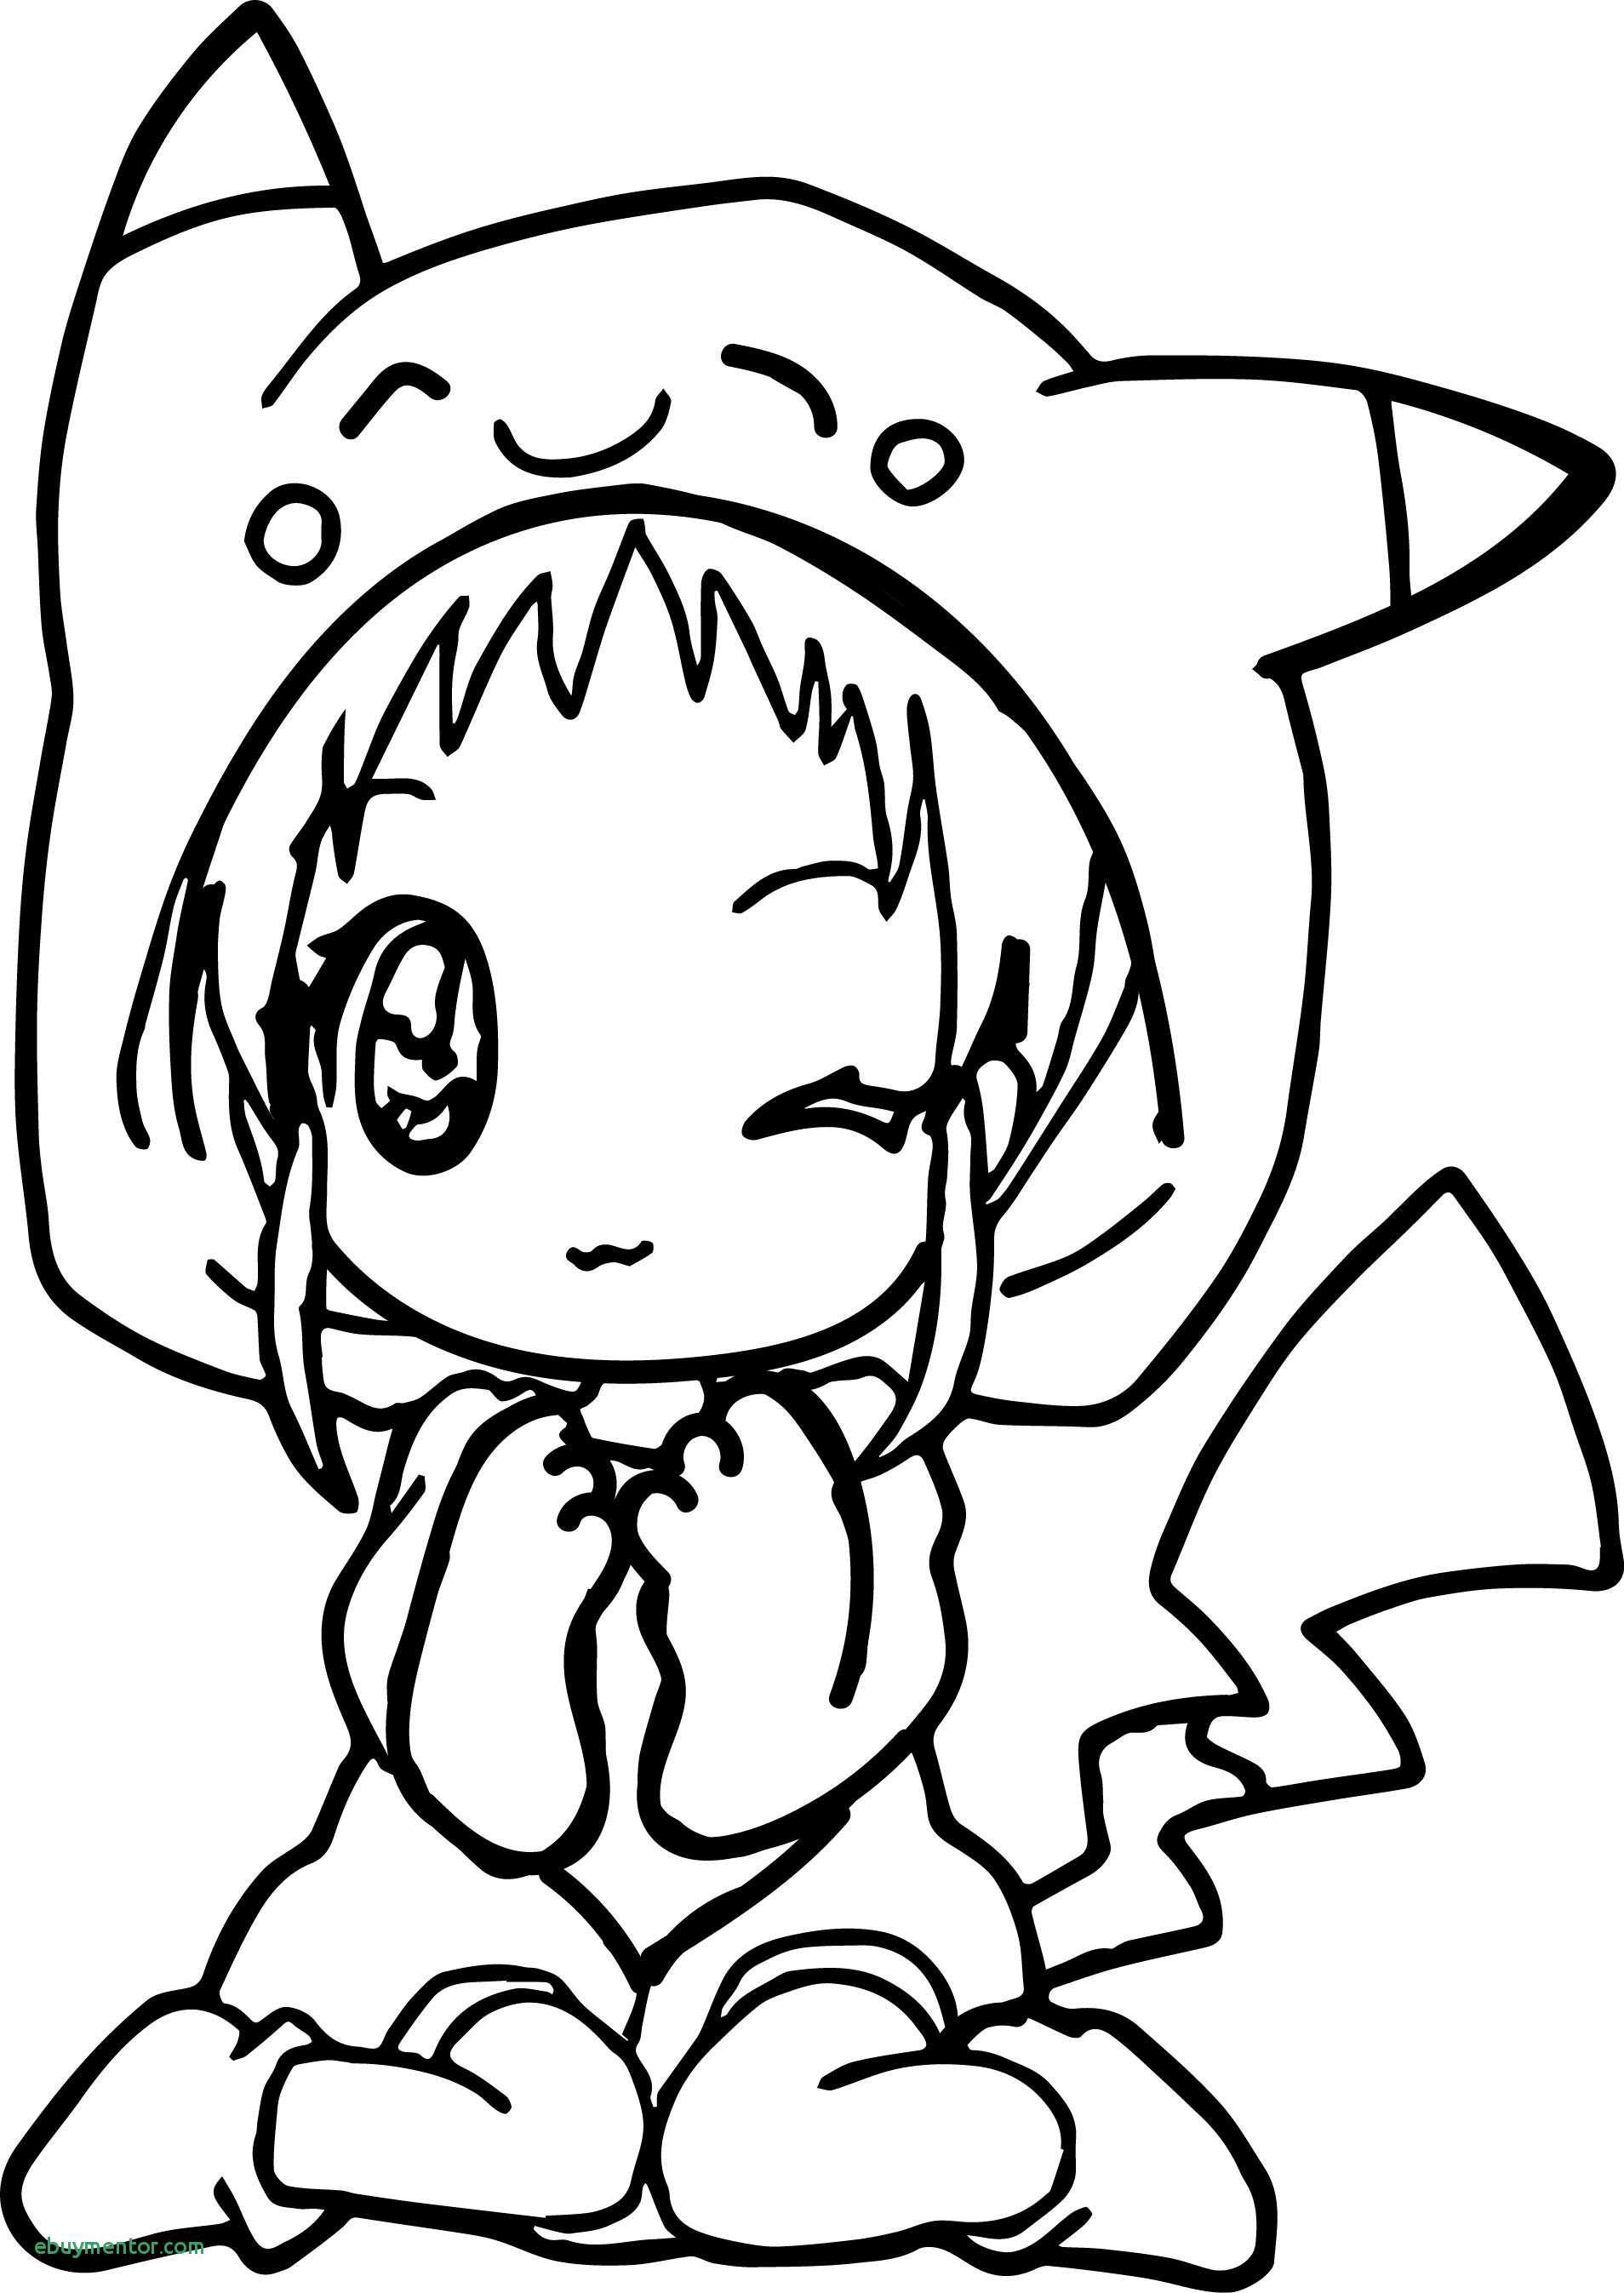 Cute Anime Chibi Girl Coloring Pages Luxury Dress Coloring Page For Girls Awesome Anime Girl Pikachu Pages